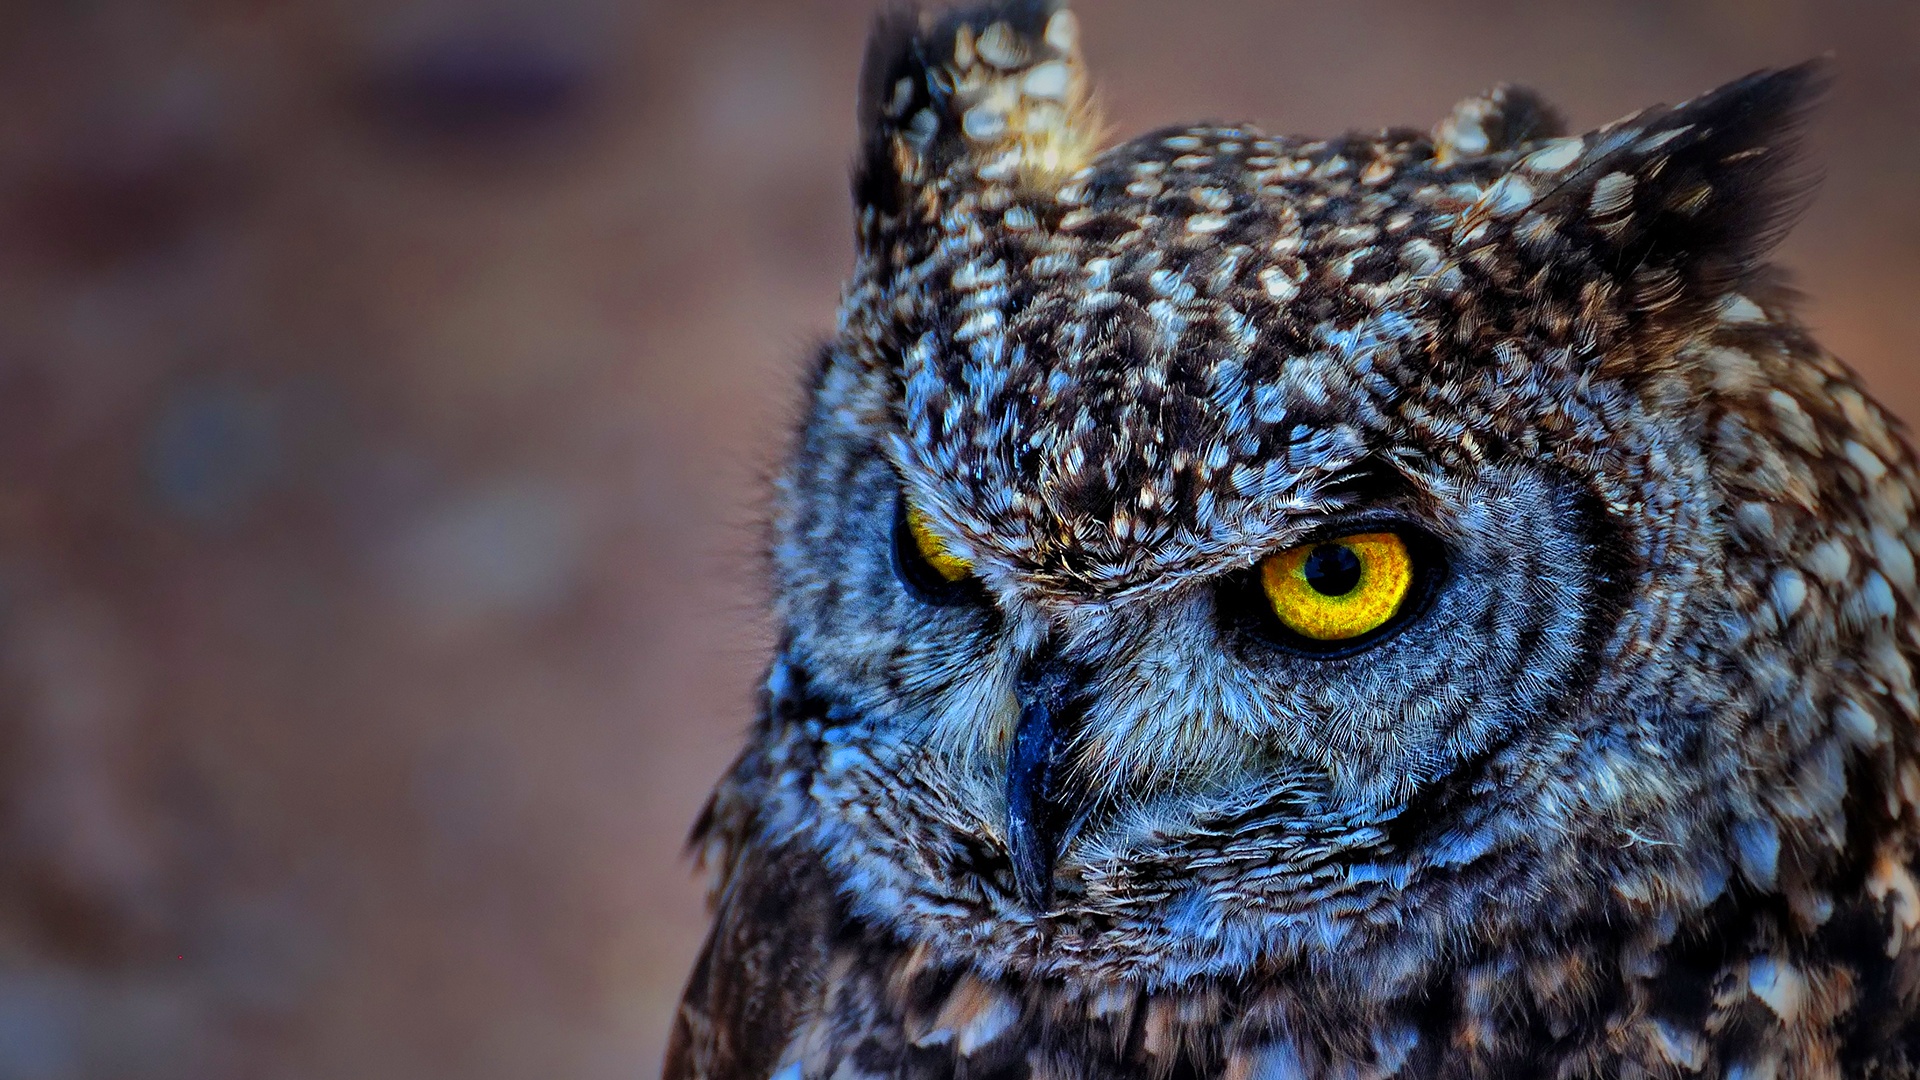 Spotted eagle owl wallpaper HD backgrounds 1920x1080.